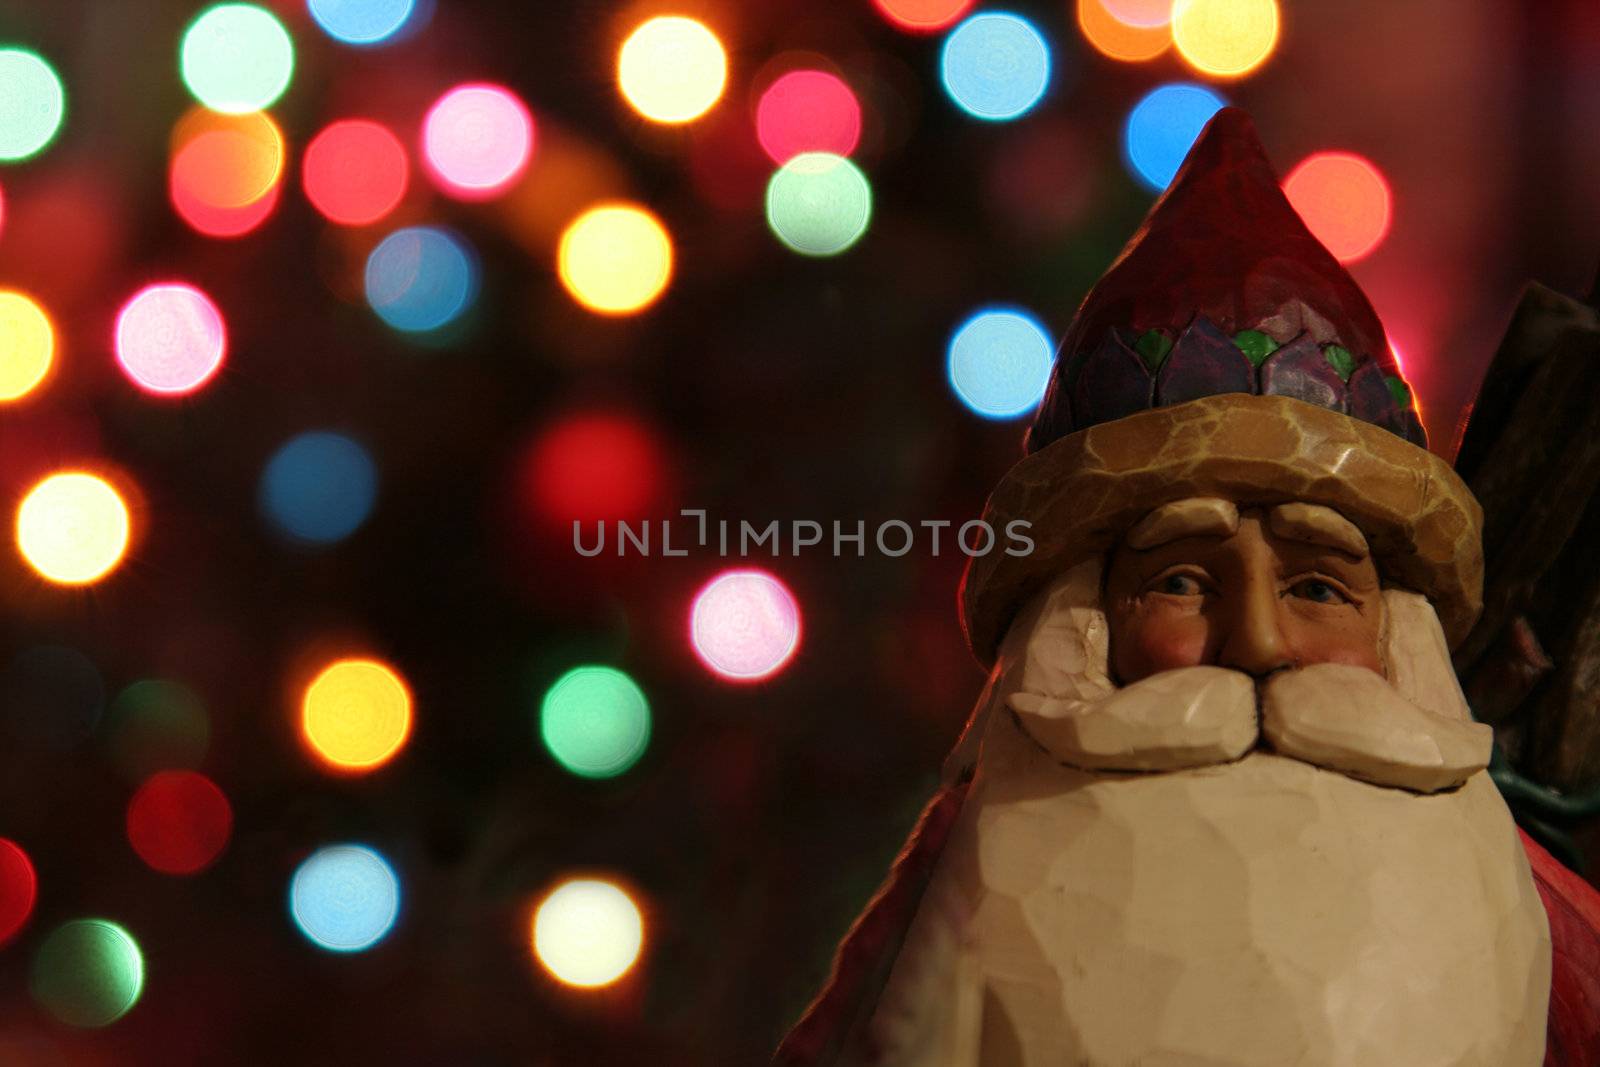 A santa claus figurine with Christmas lights in the background.